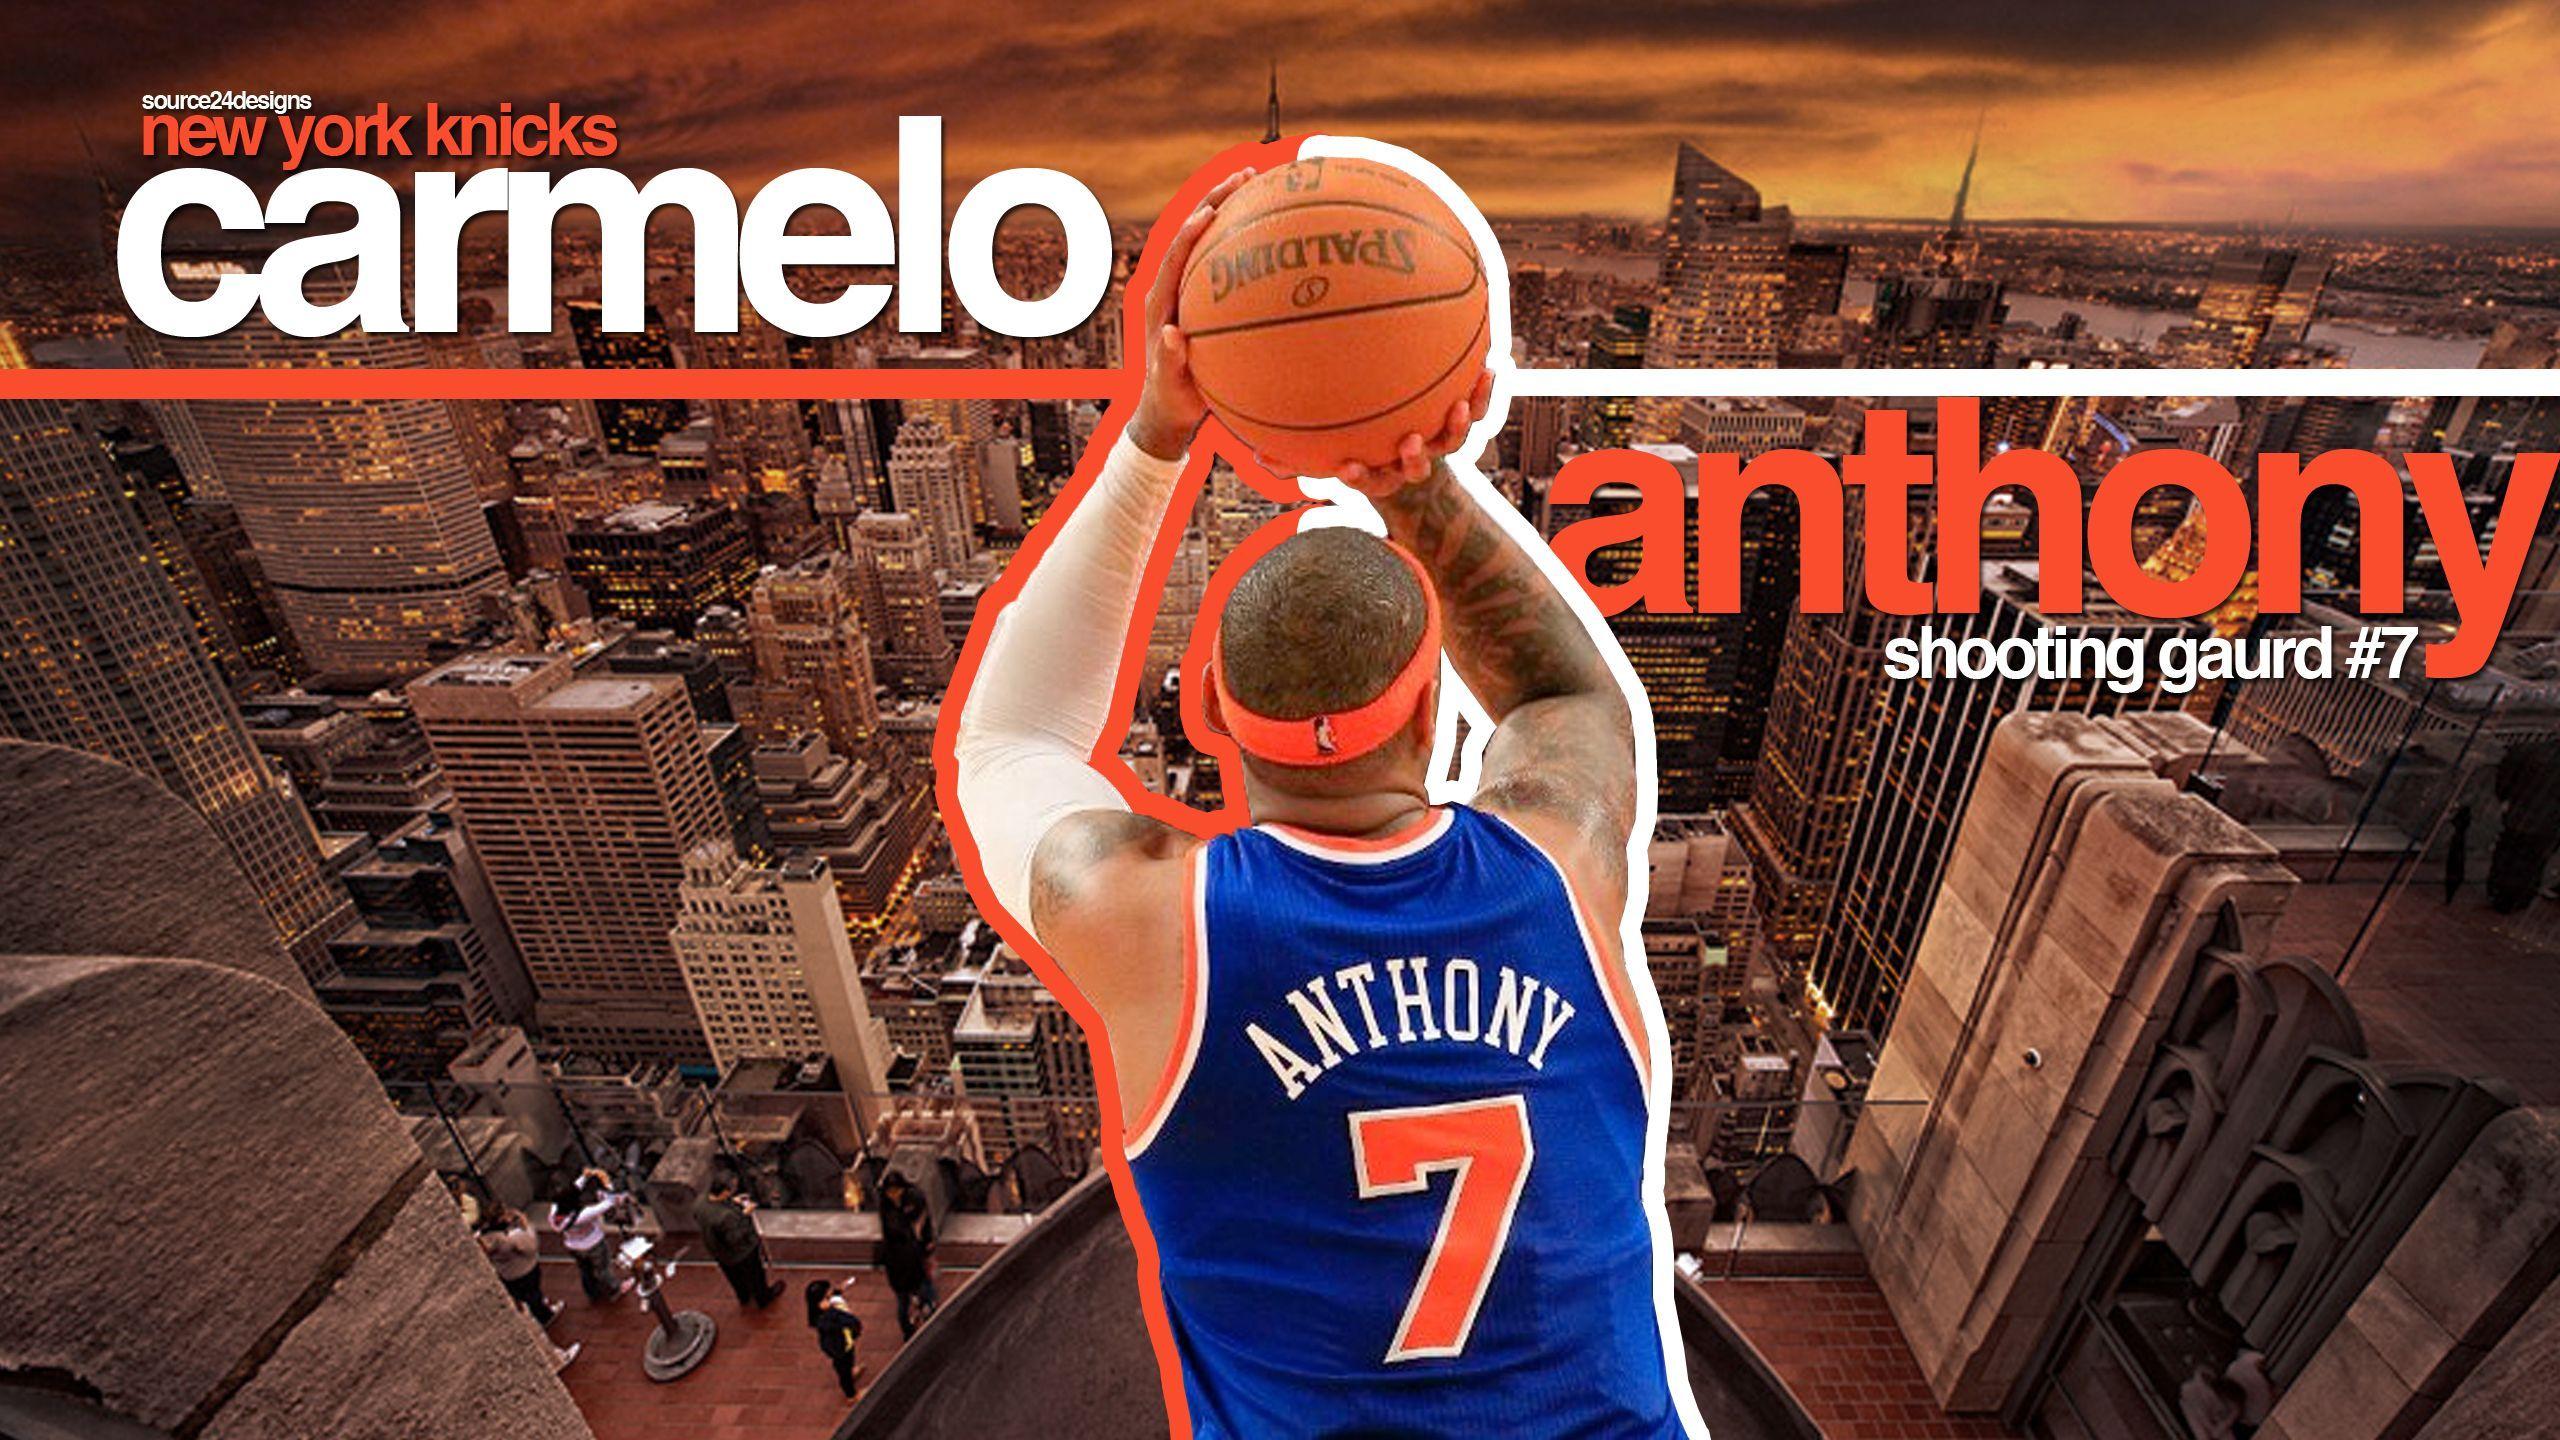 image about Stuff to Buy. New York Knicks